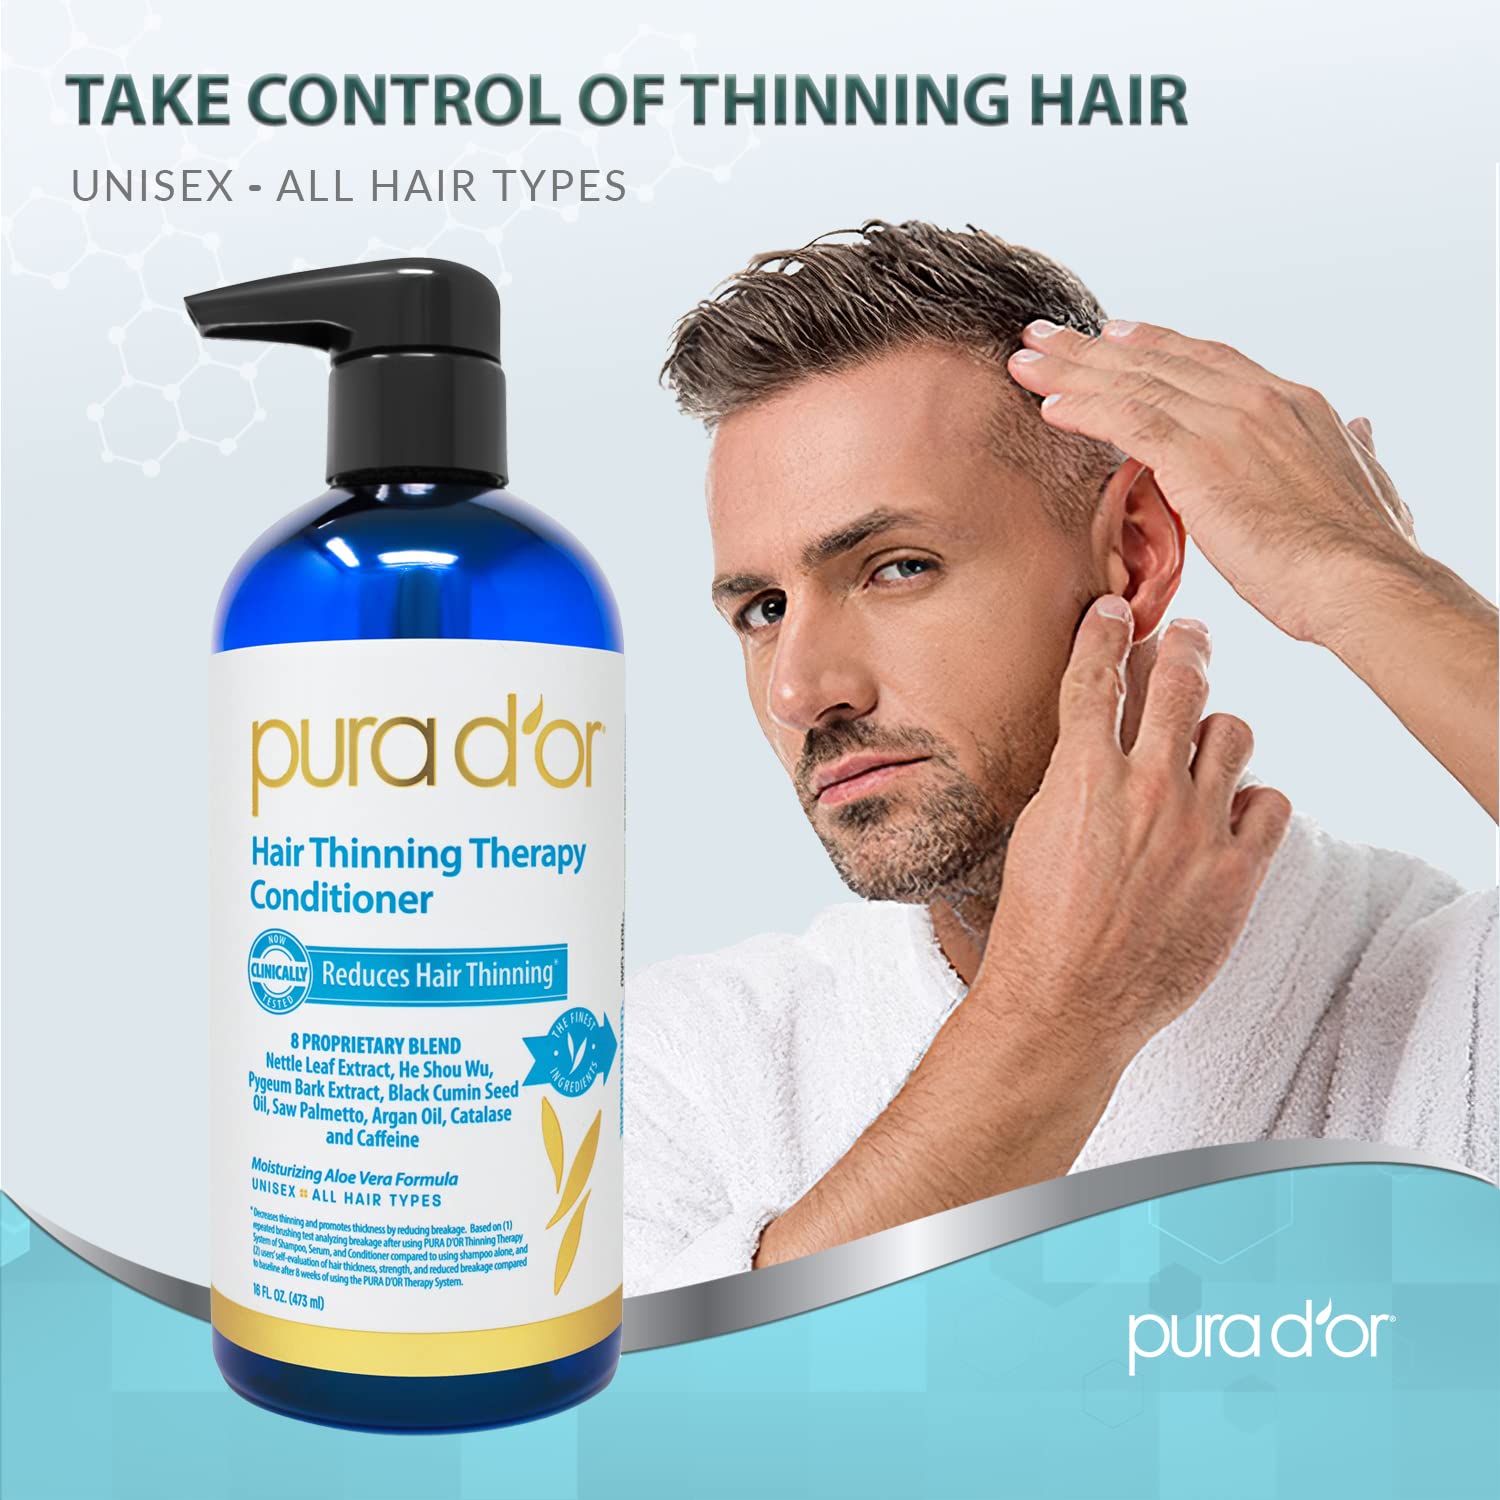 PURA D'OR Hair Thinning Therapy Biotin Conditioner, CLINICALLY TESTED Proven Results, Low Lather Deep Moisturizing Herbal DHT Blocker Hair Thickening Products For Women & Men, Color Safe, 16oz